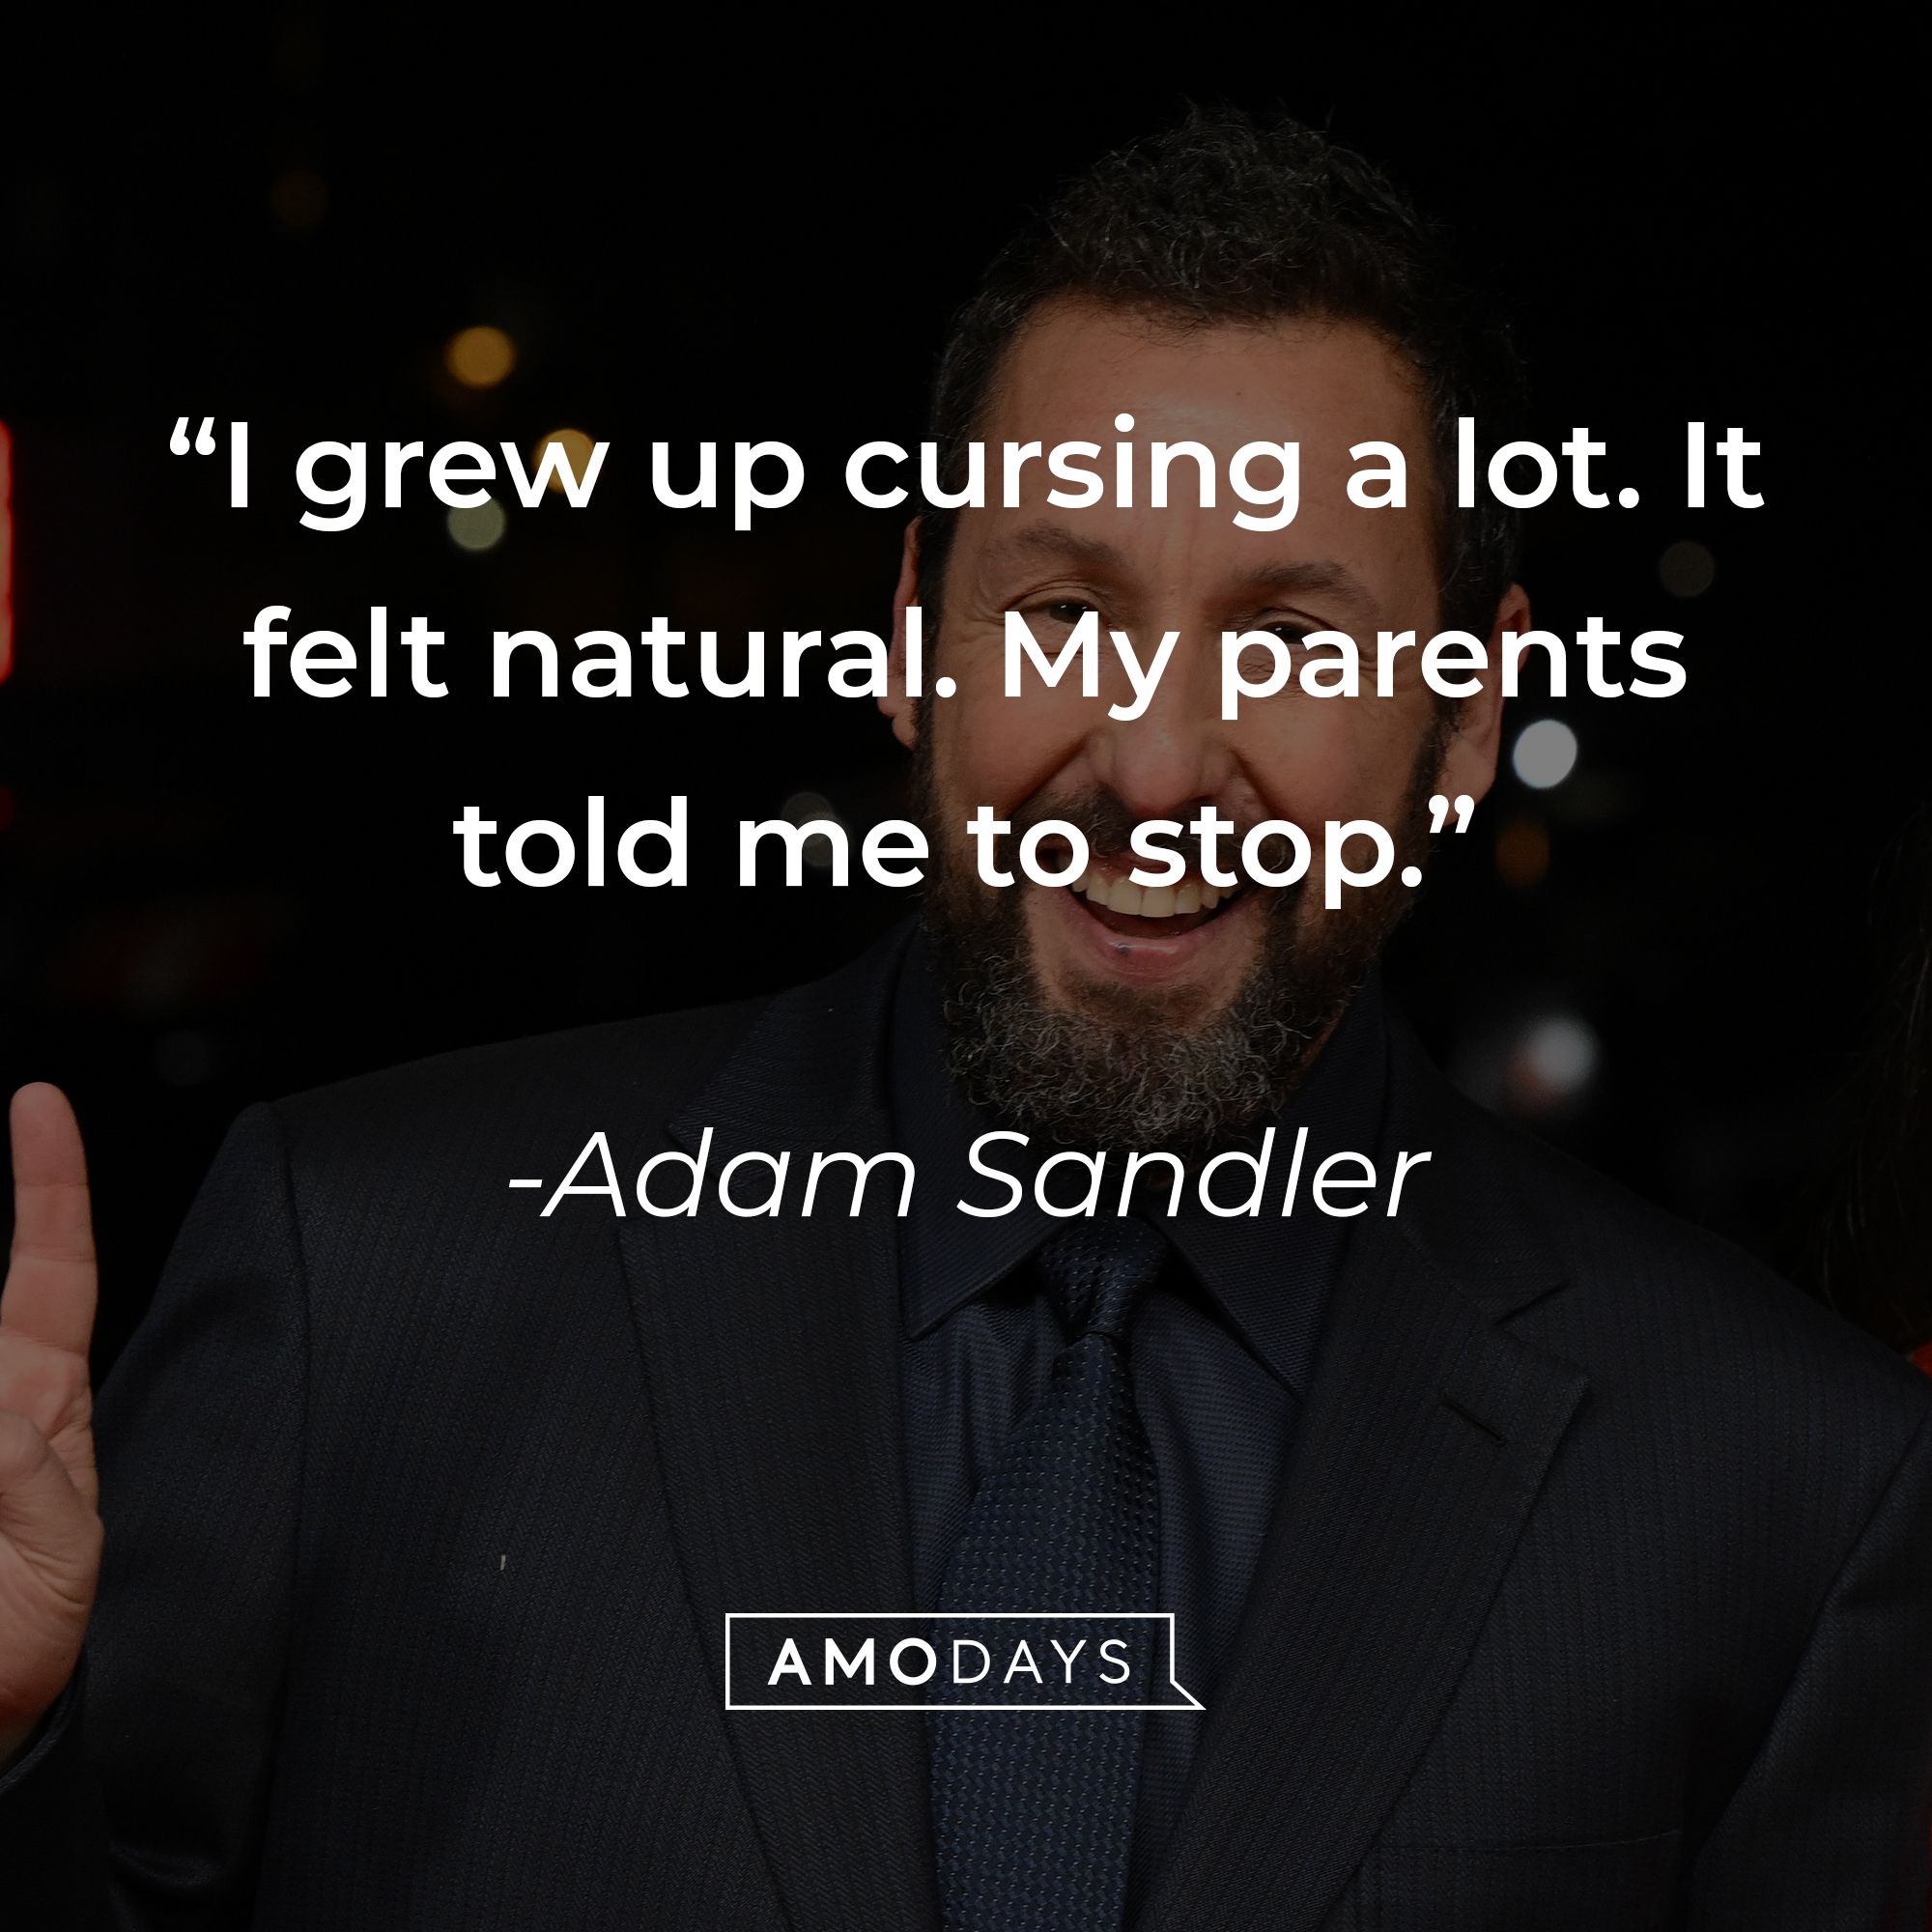 Adam Sandler's quote: "I grew up cursing a lot. It felt natural. My parents told me to stop." | Source: Getty Images